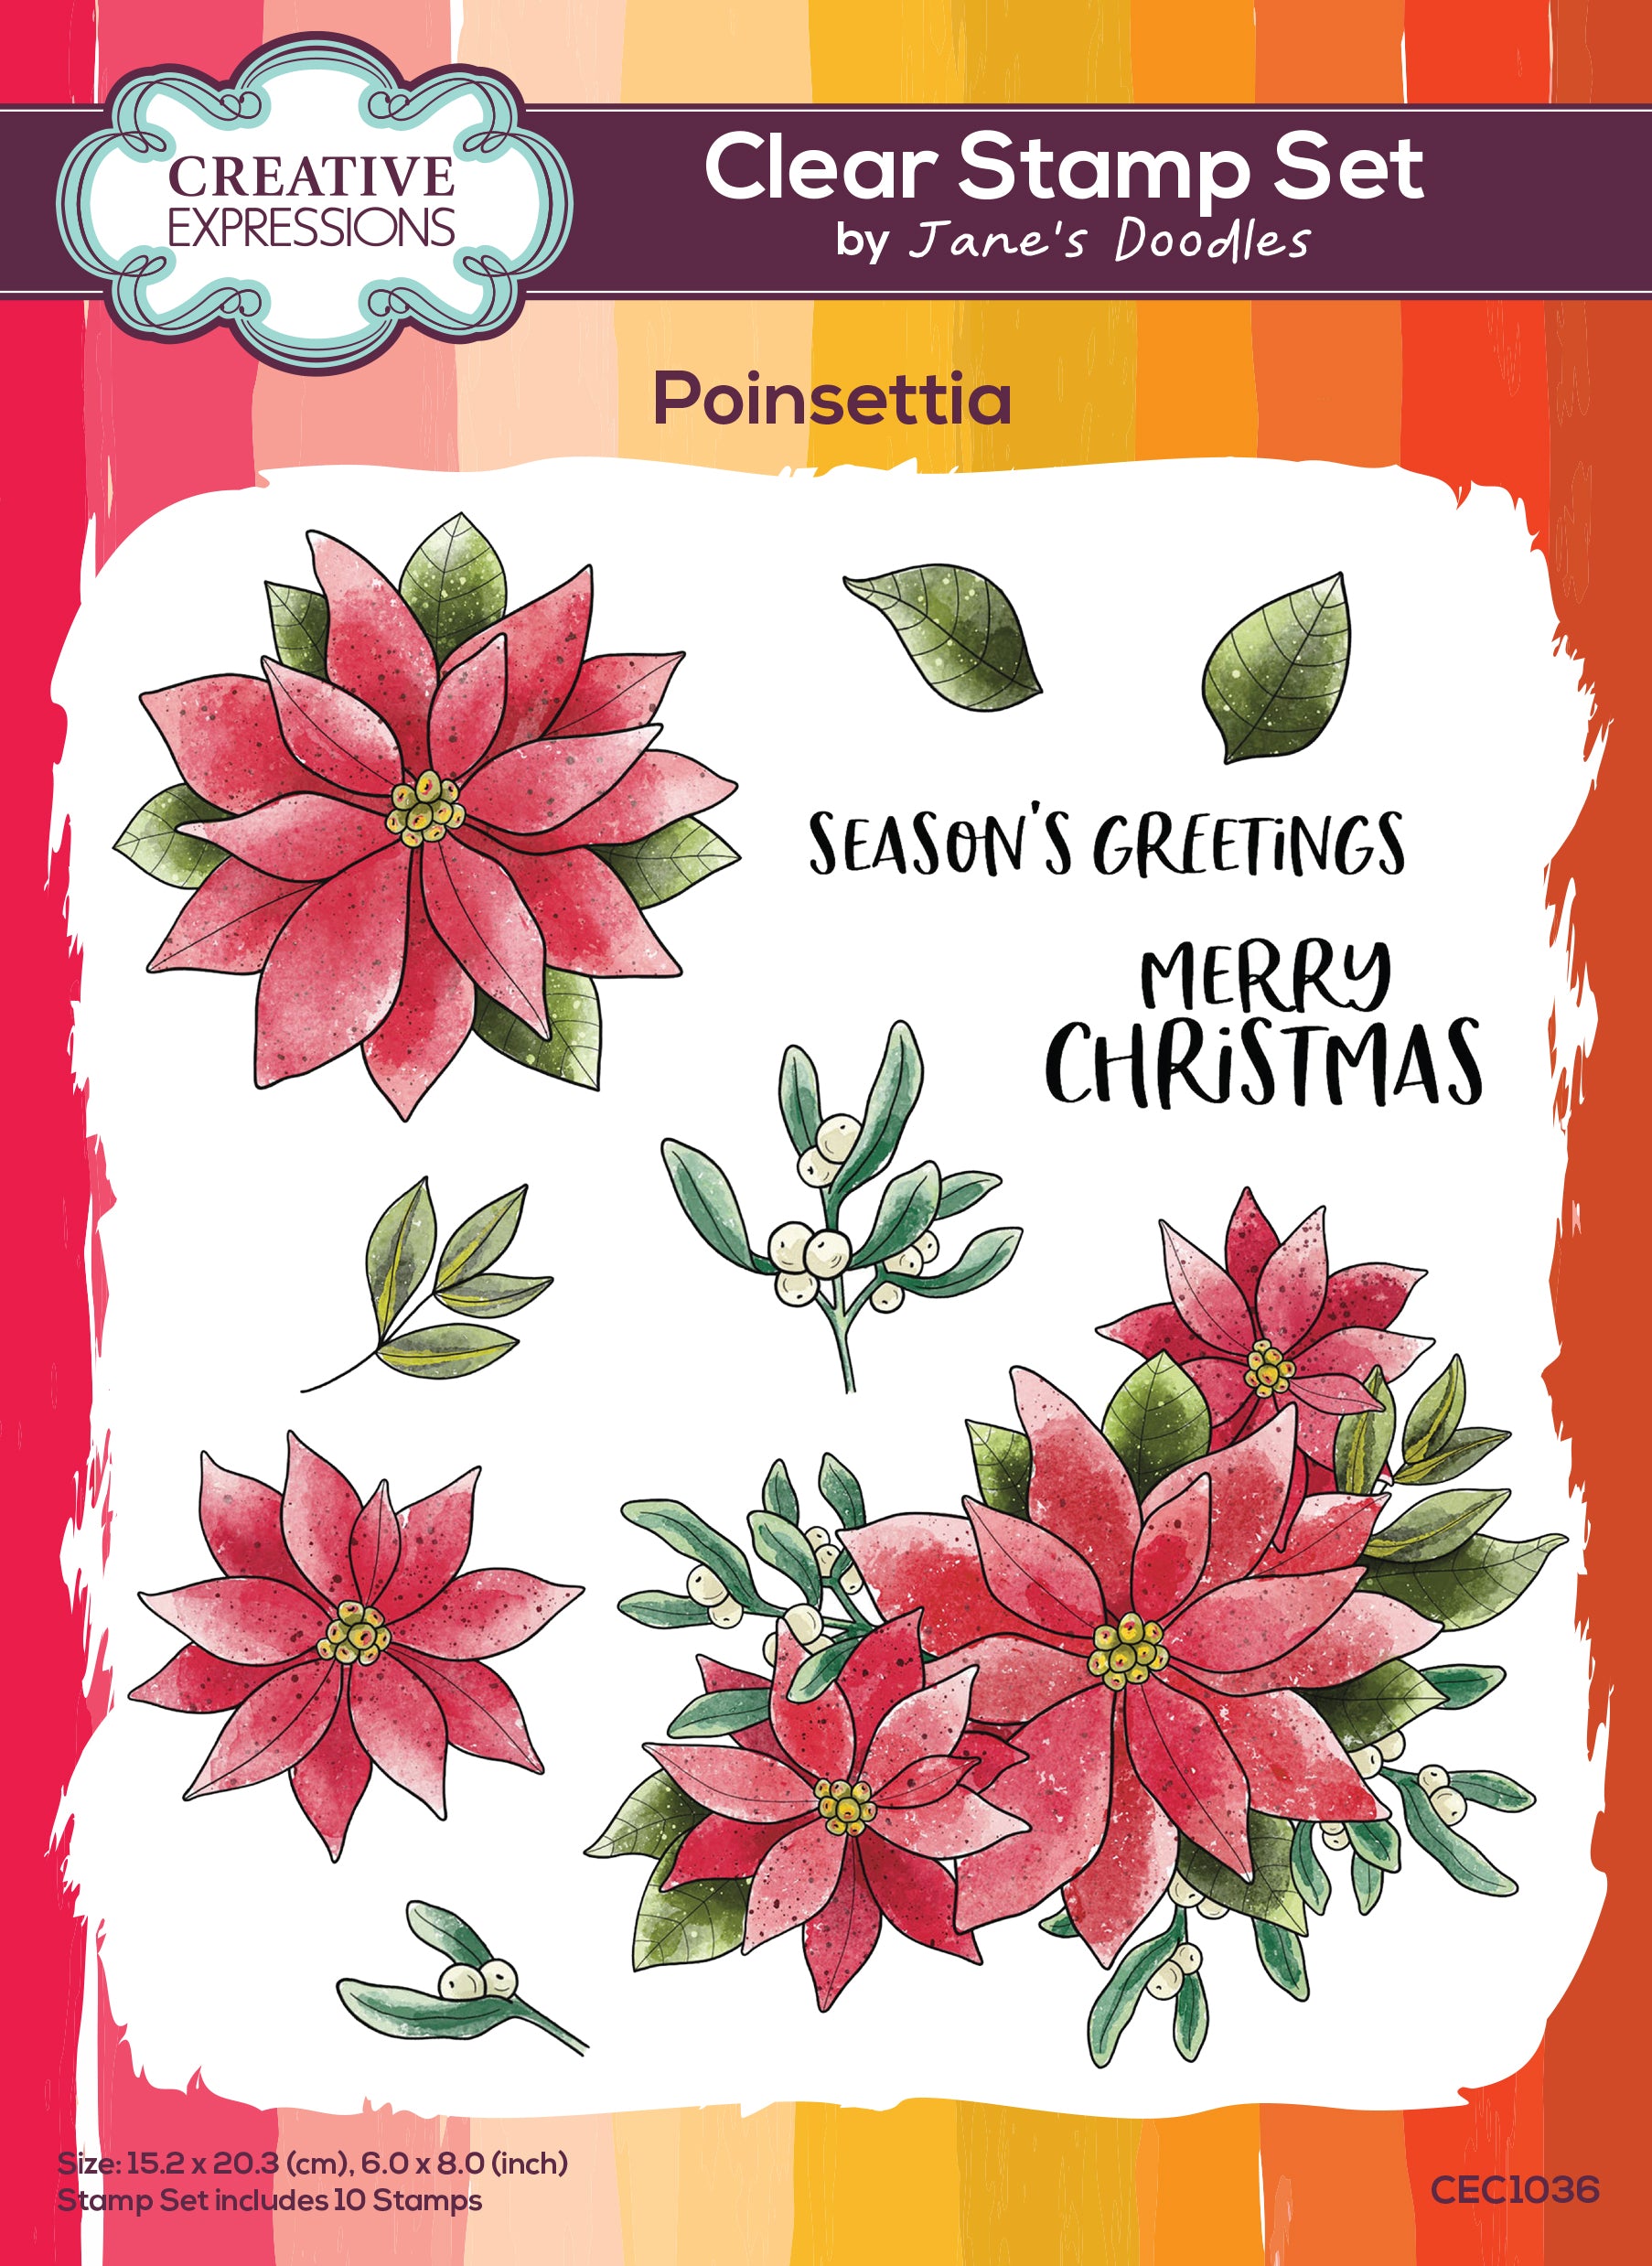 Creative Expressions Jane's Doodles Poinsettia 6 in x 8 in Clear Stamp Set